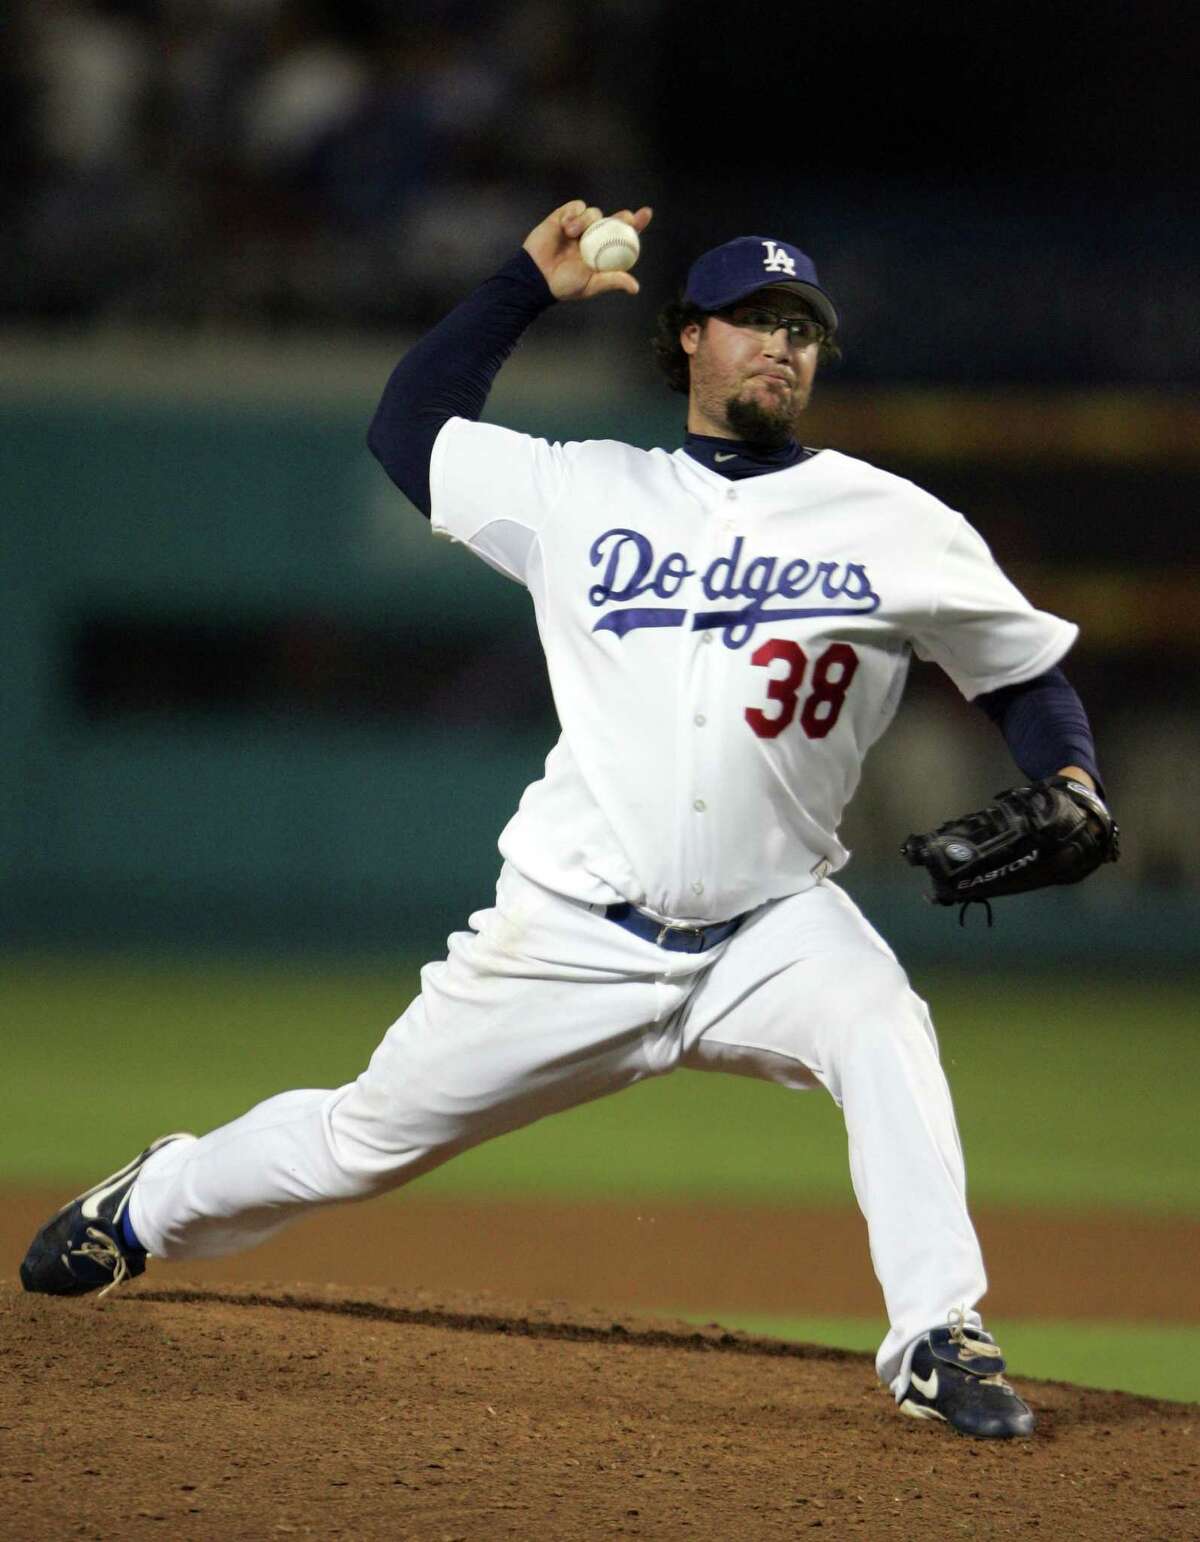 Los Angeles Dodgers pitcher Eric Gagne pitches against the Philadelphia Phillies during the ninth inning in an MLB baseball game, Friday, June 2, 2006, in Los Angeles. (AP Photo/Jeff Lewis)